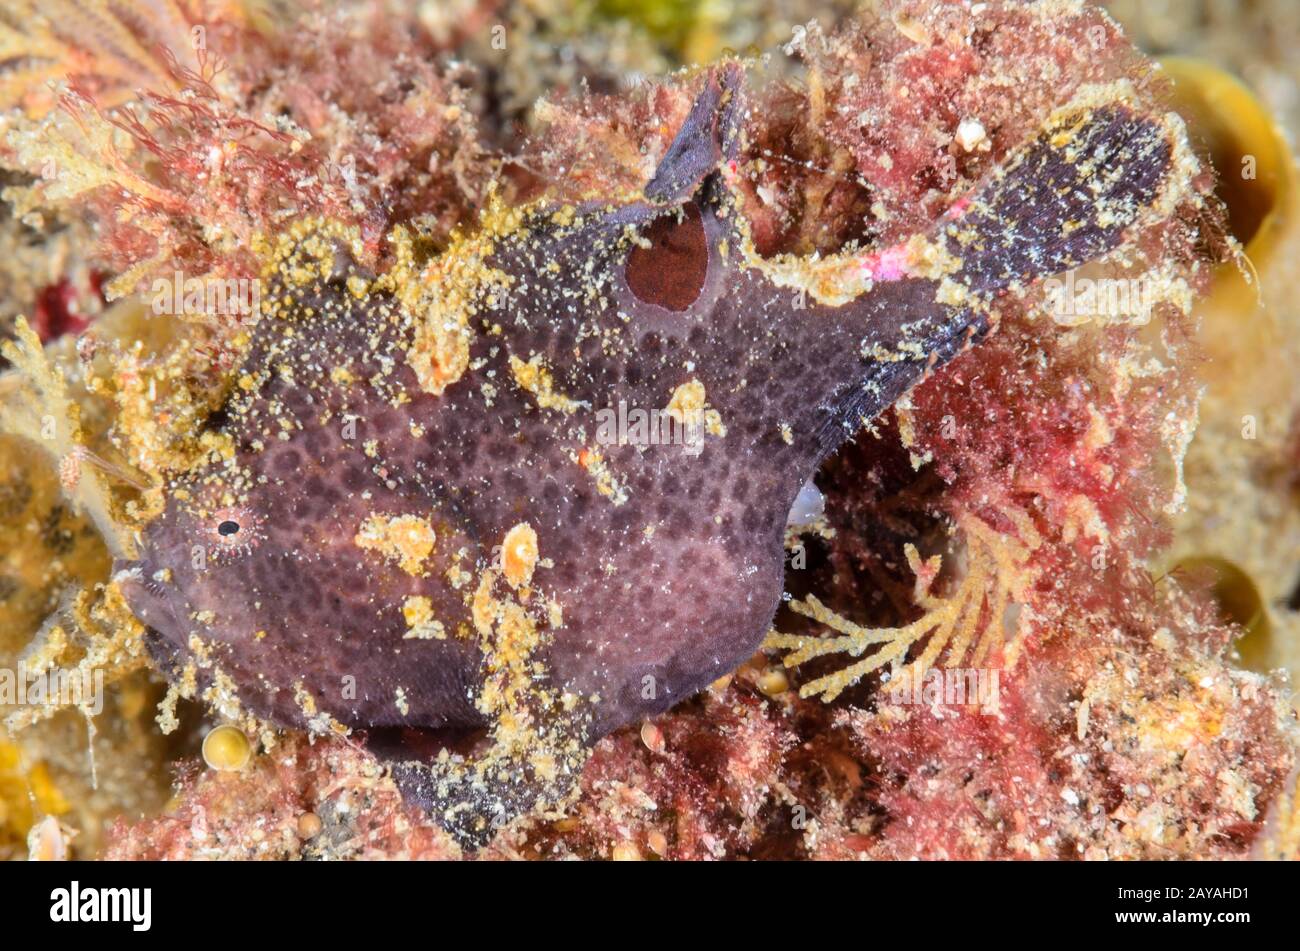 Lembeh frogfish, Nudiantennarius subteres, Lembeh Strait, North Sulawesi, Indonesia, Pacific Stock Photo